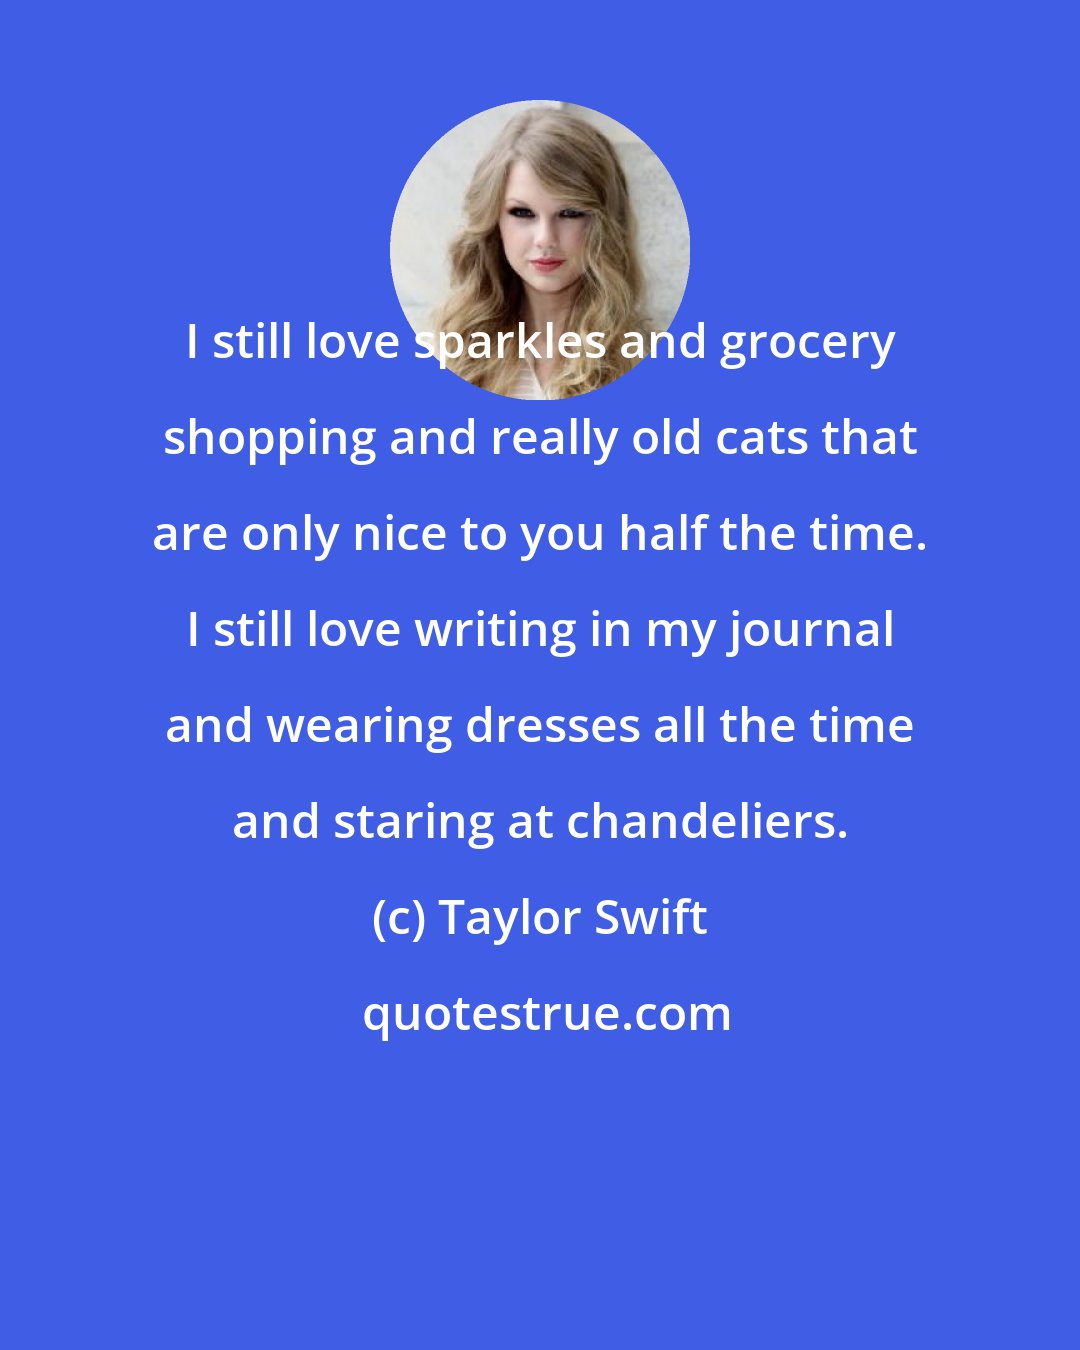 Taylor Swift: I still love sparkles and grocery shopping and really old cats that are only nice to you half the time. I still love writing in my journal and wearing dresses all the time and staring at chandeliers.